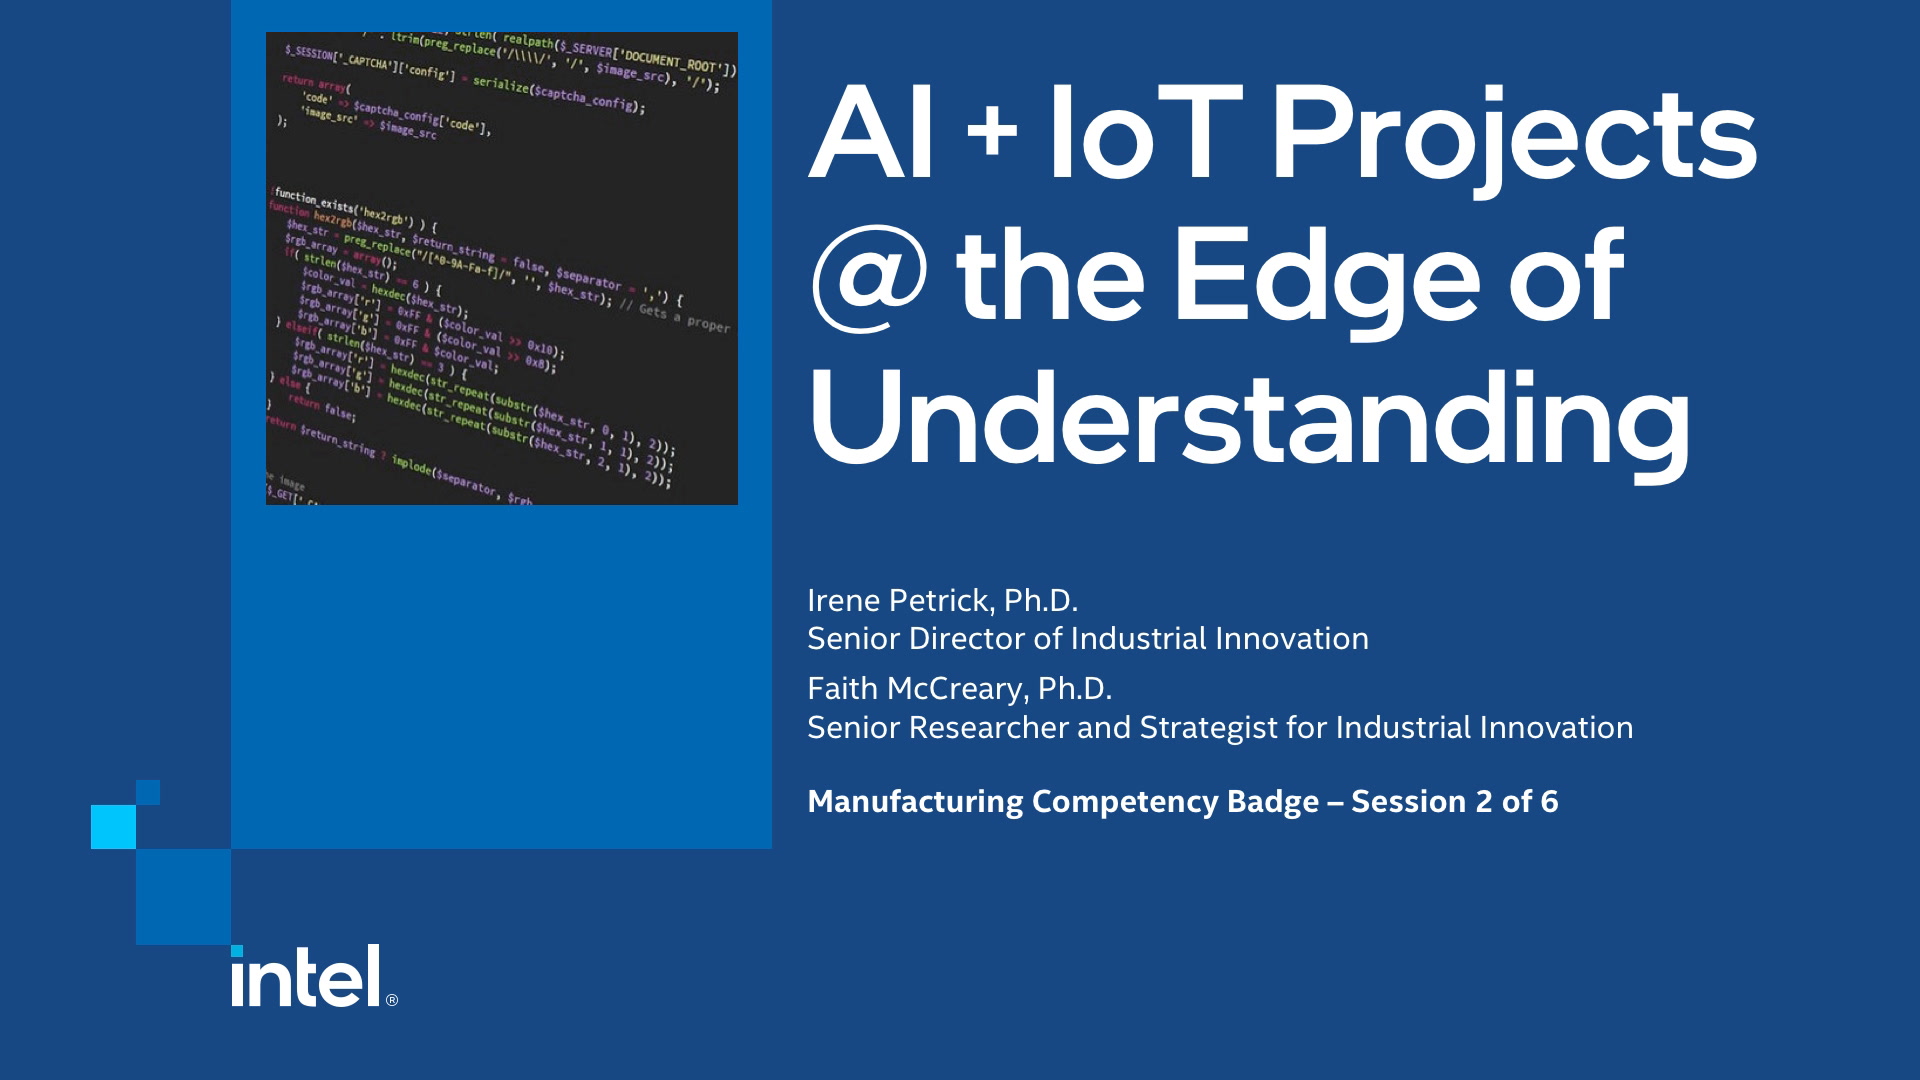 IoT Projects at the Edge of Understanding